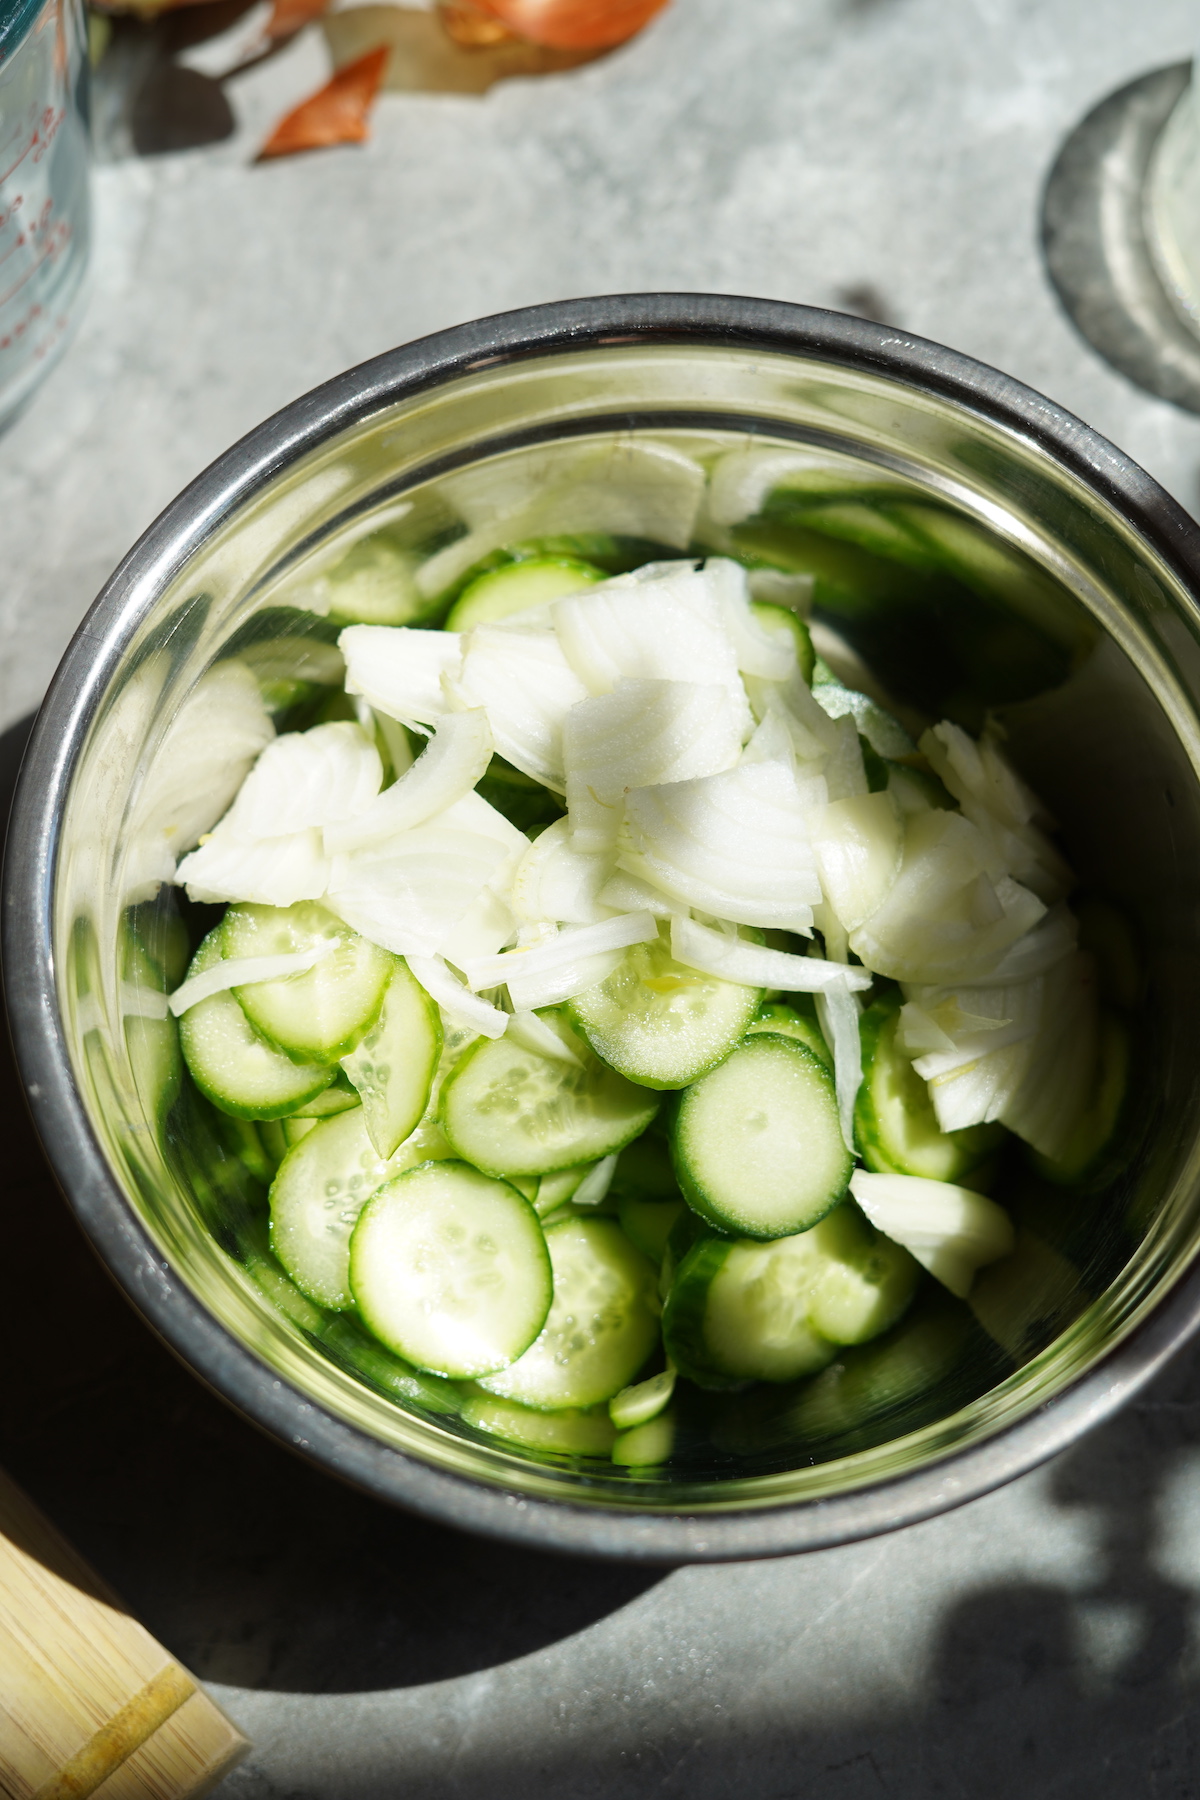 Cucumbers and onions in a mixing bowl.